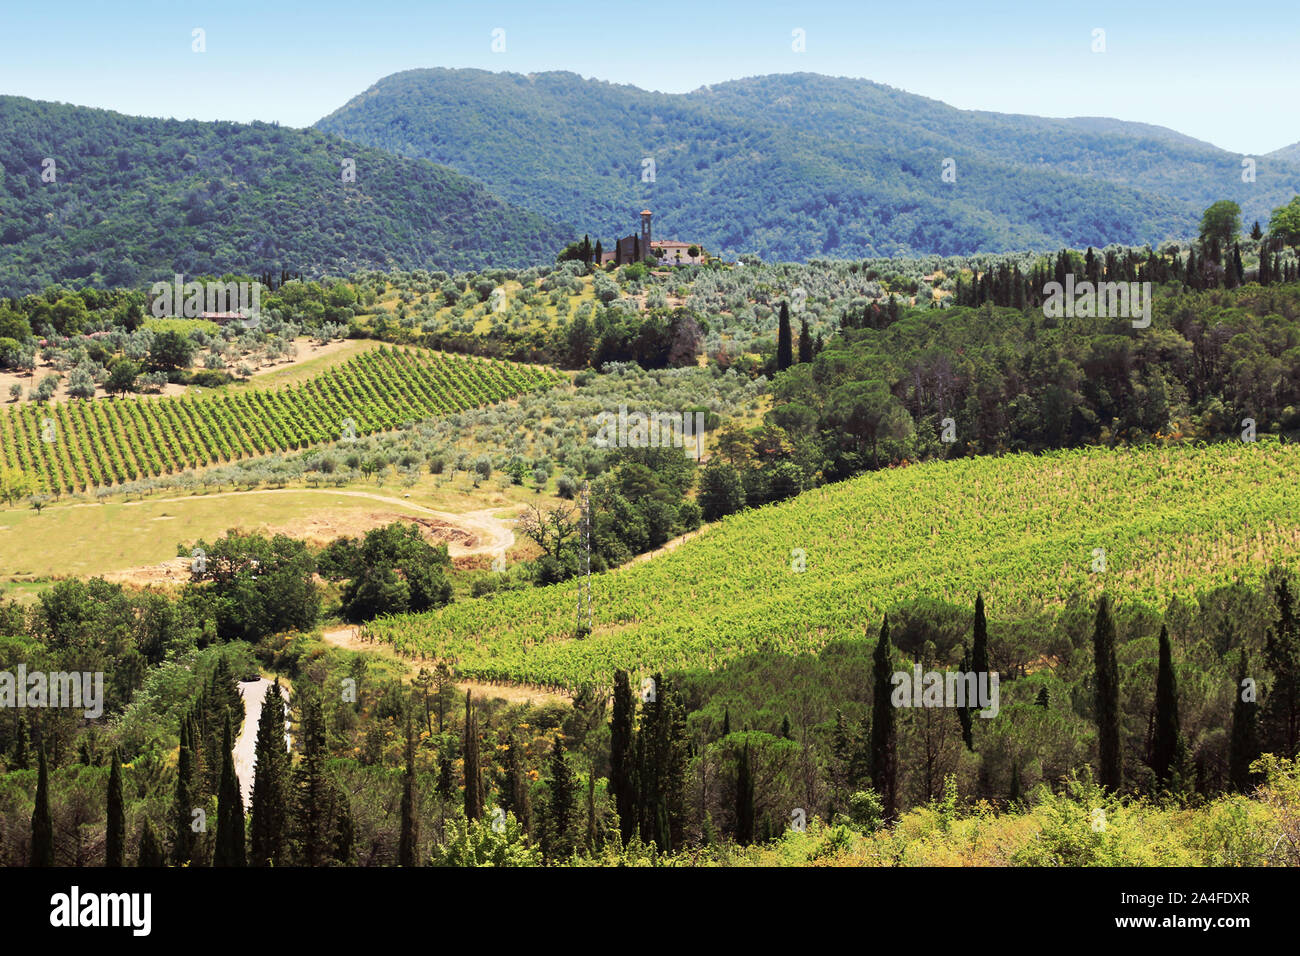 Hills, vineyards, olive trees and cypresses in Chianti. Stock Photo